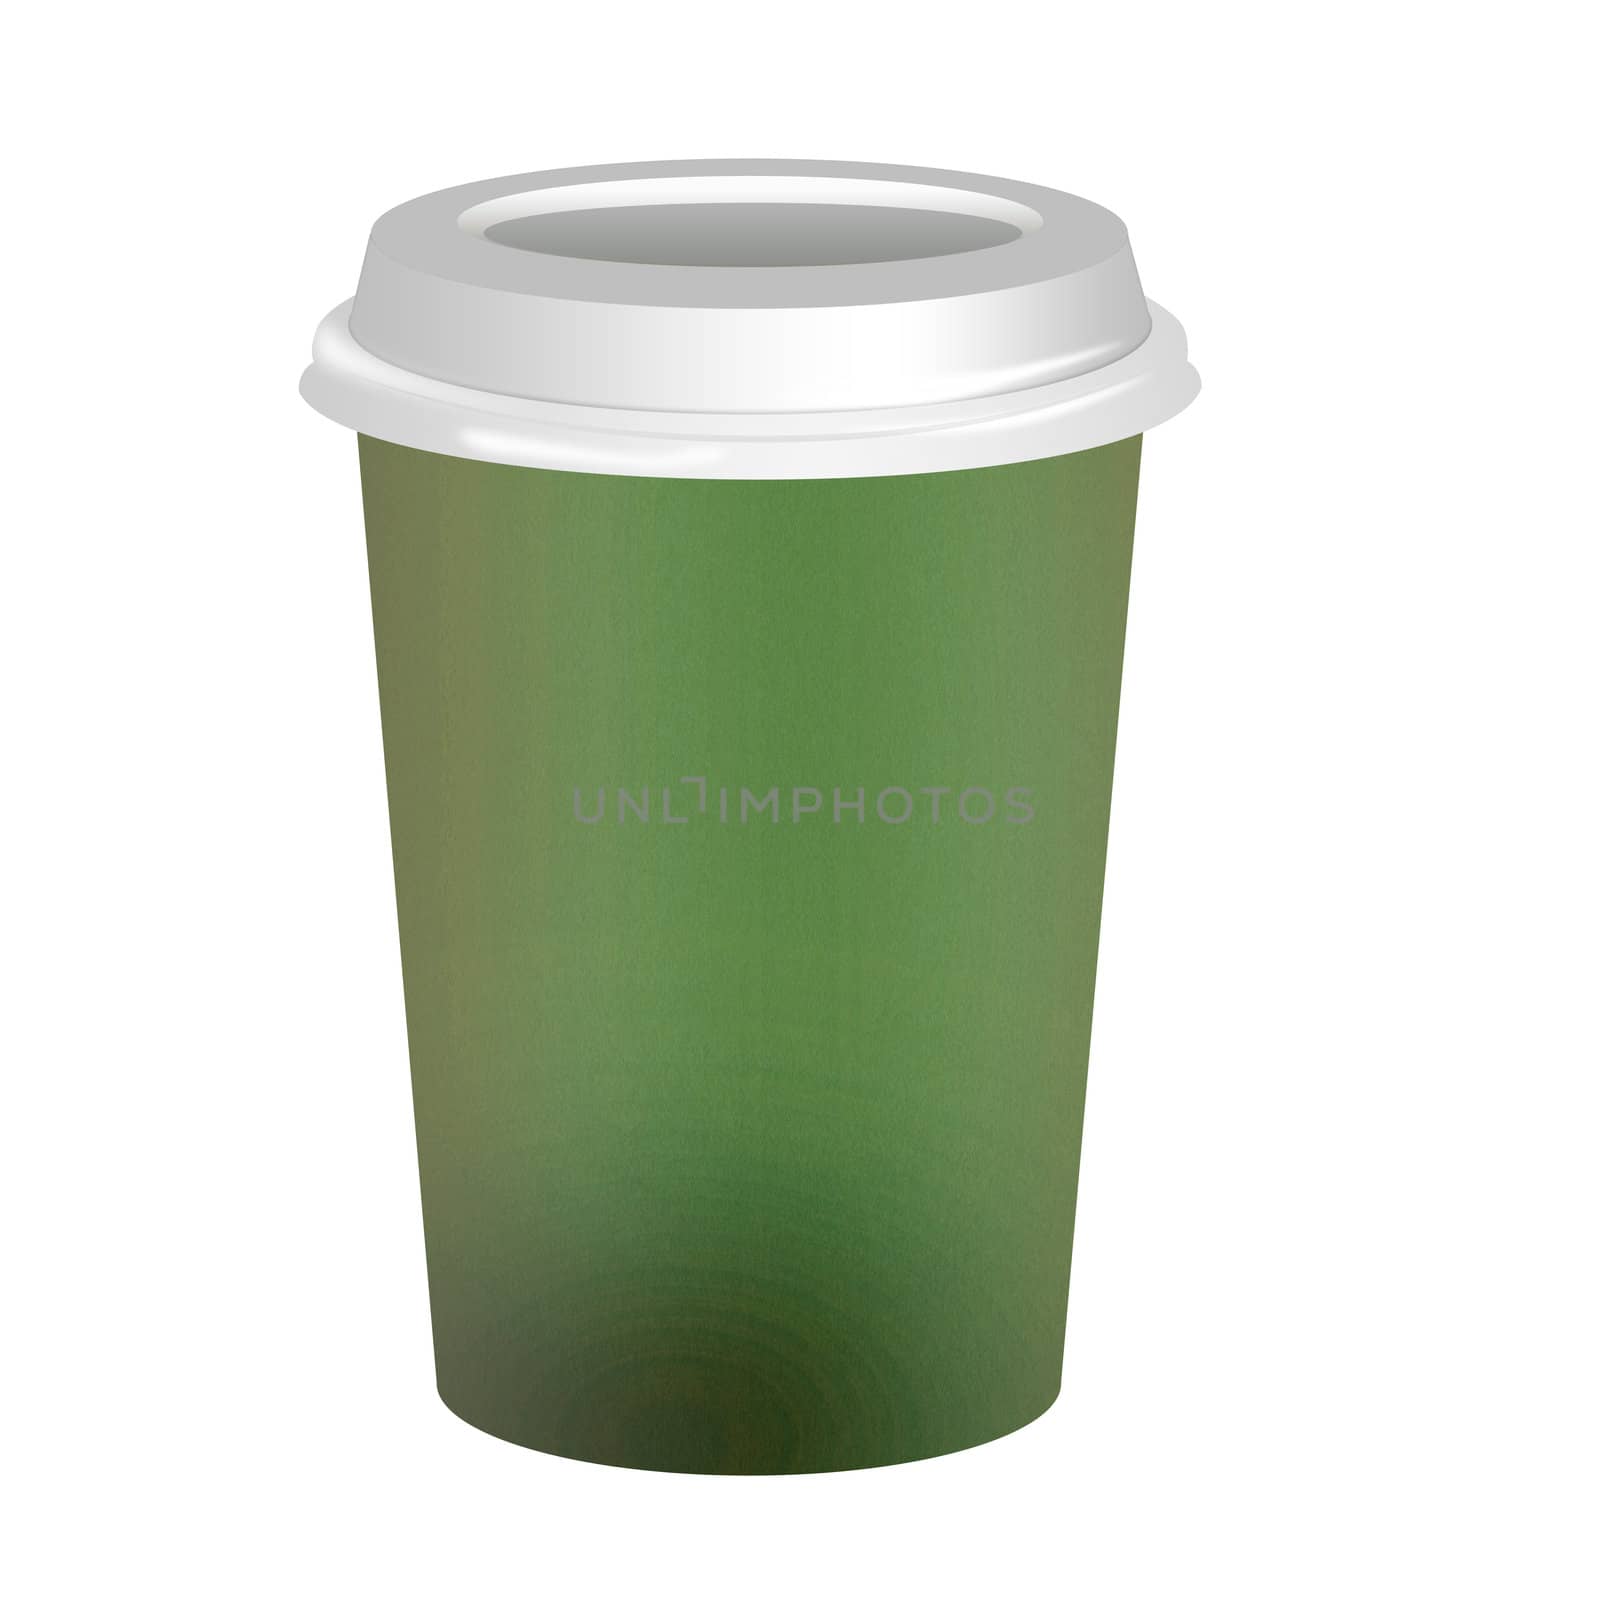 Takeaway coffee cup over white background by jakgree